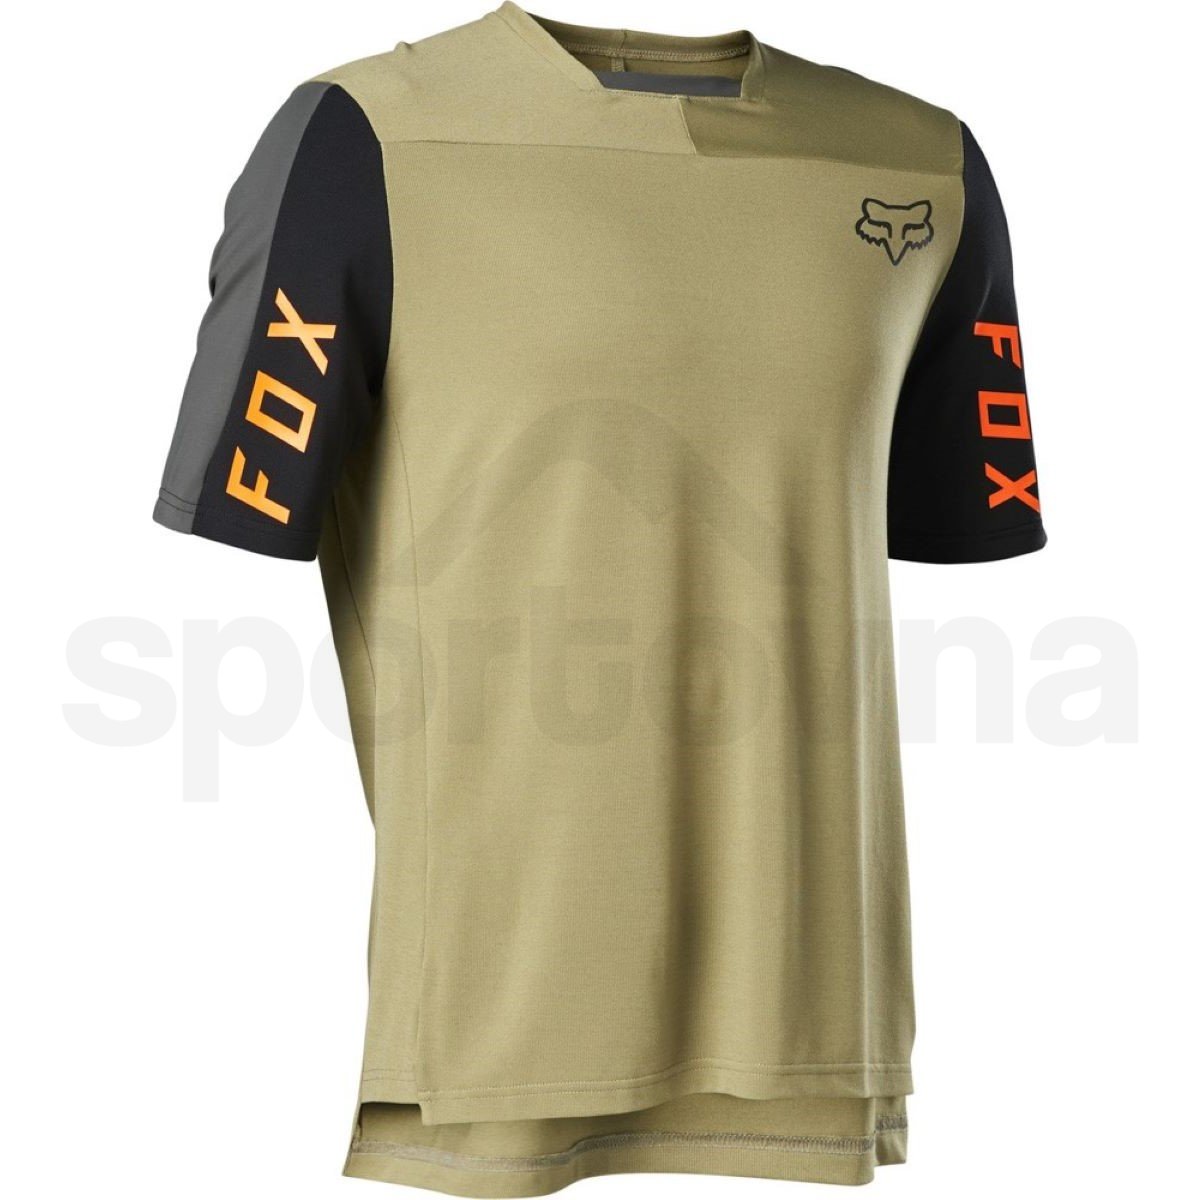 defend-pro-ss-jersey (4)